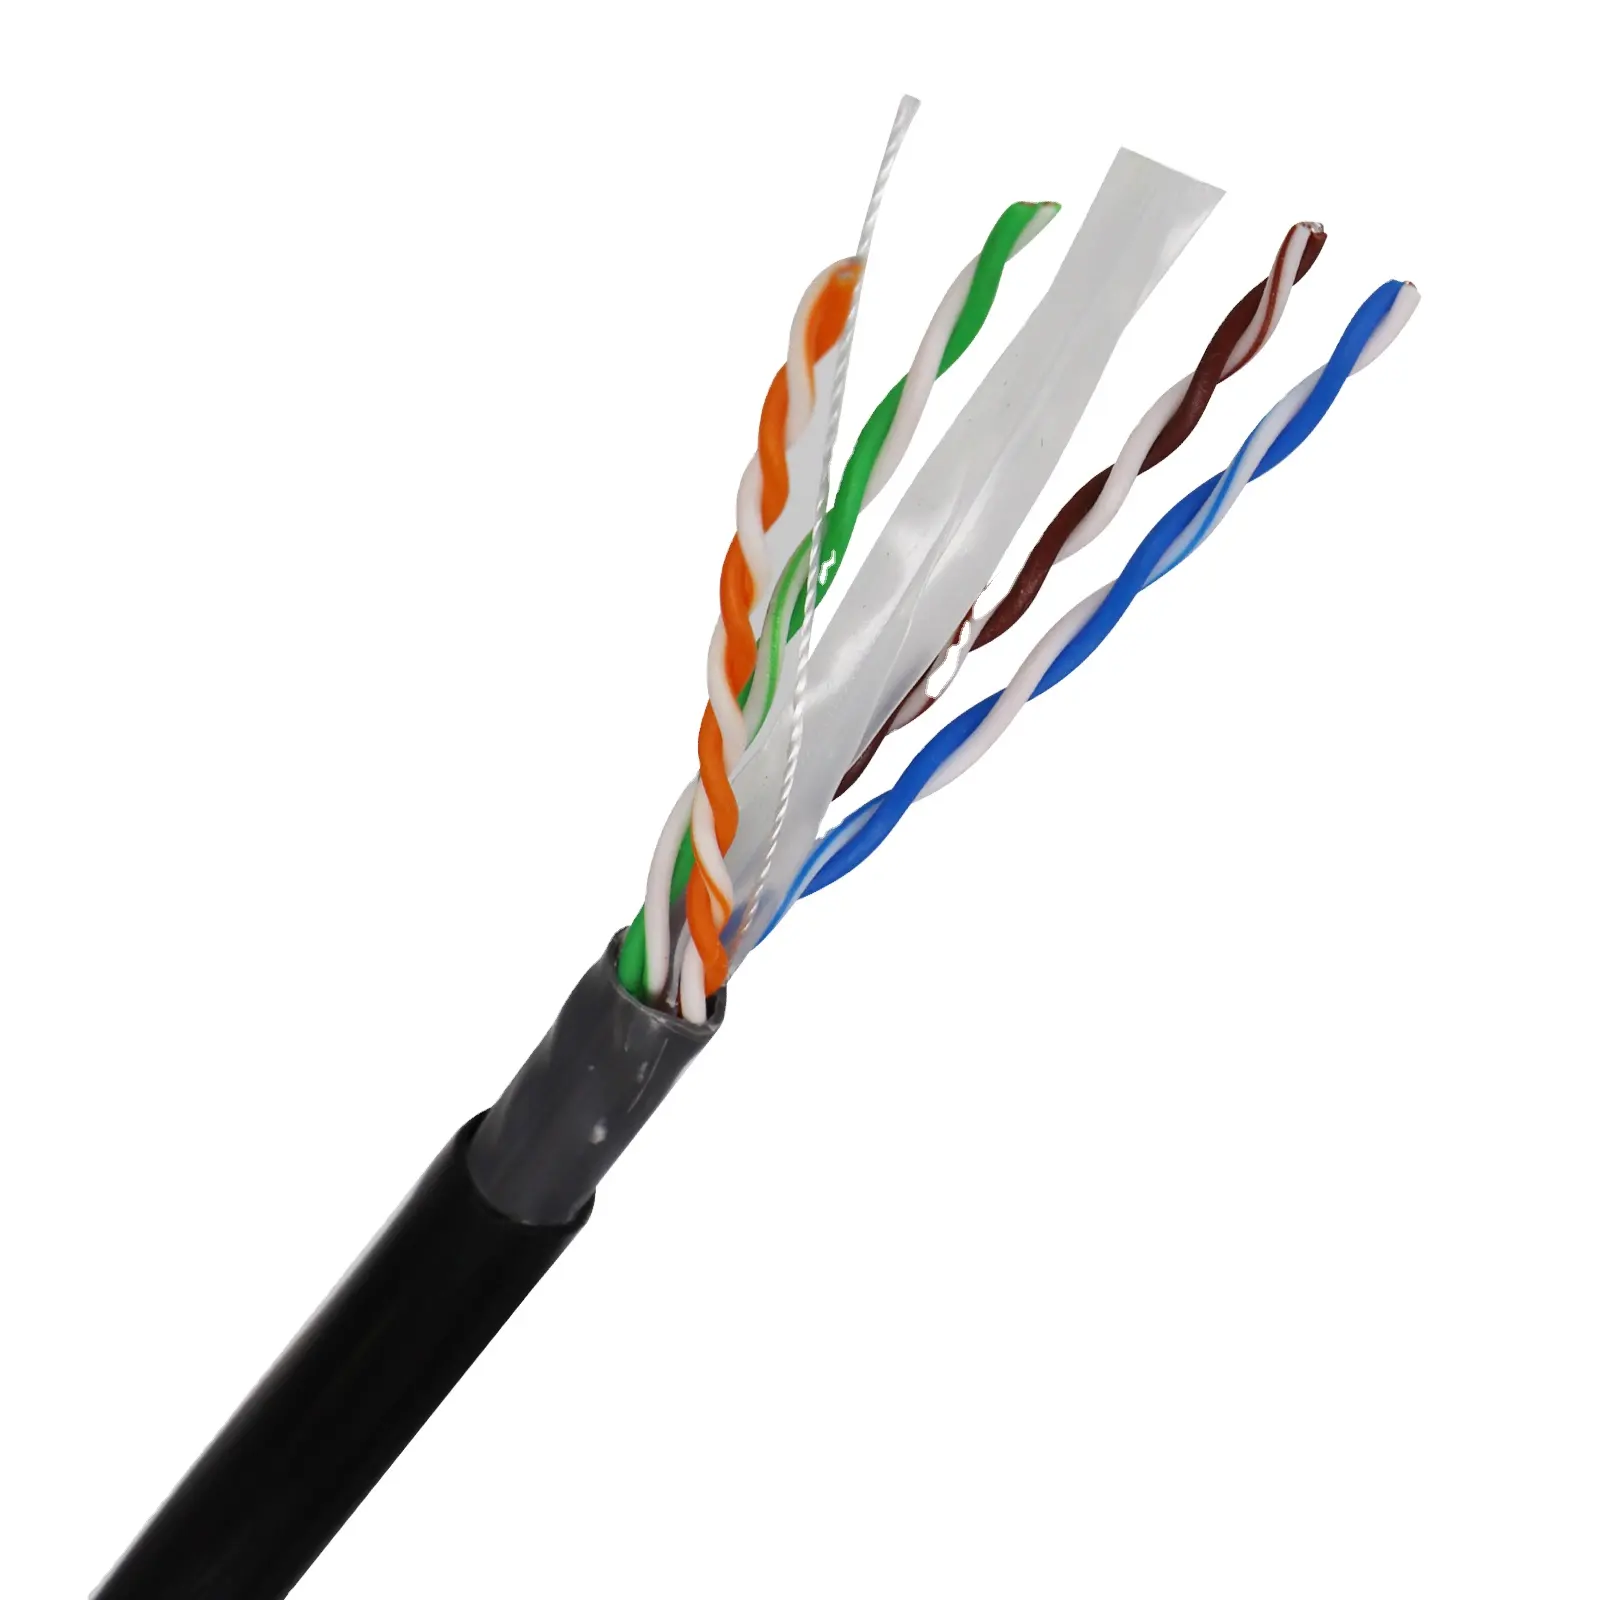 Outdoor indoor network cat 6 cable Waterproof 305 Meter Per Roll Shielded Internet Cable UTP Cat6 Lan Cable